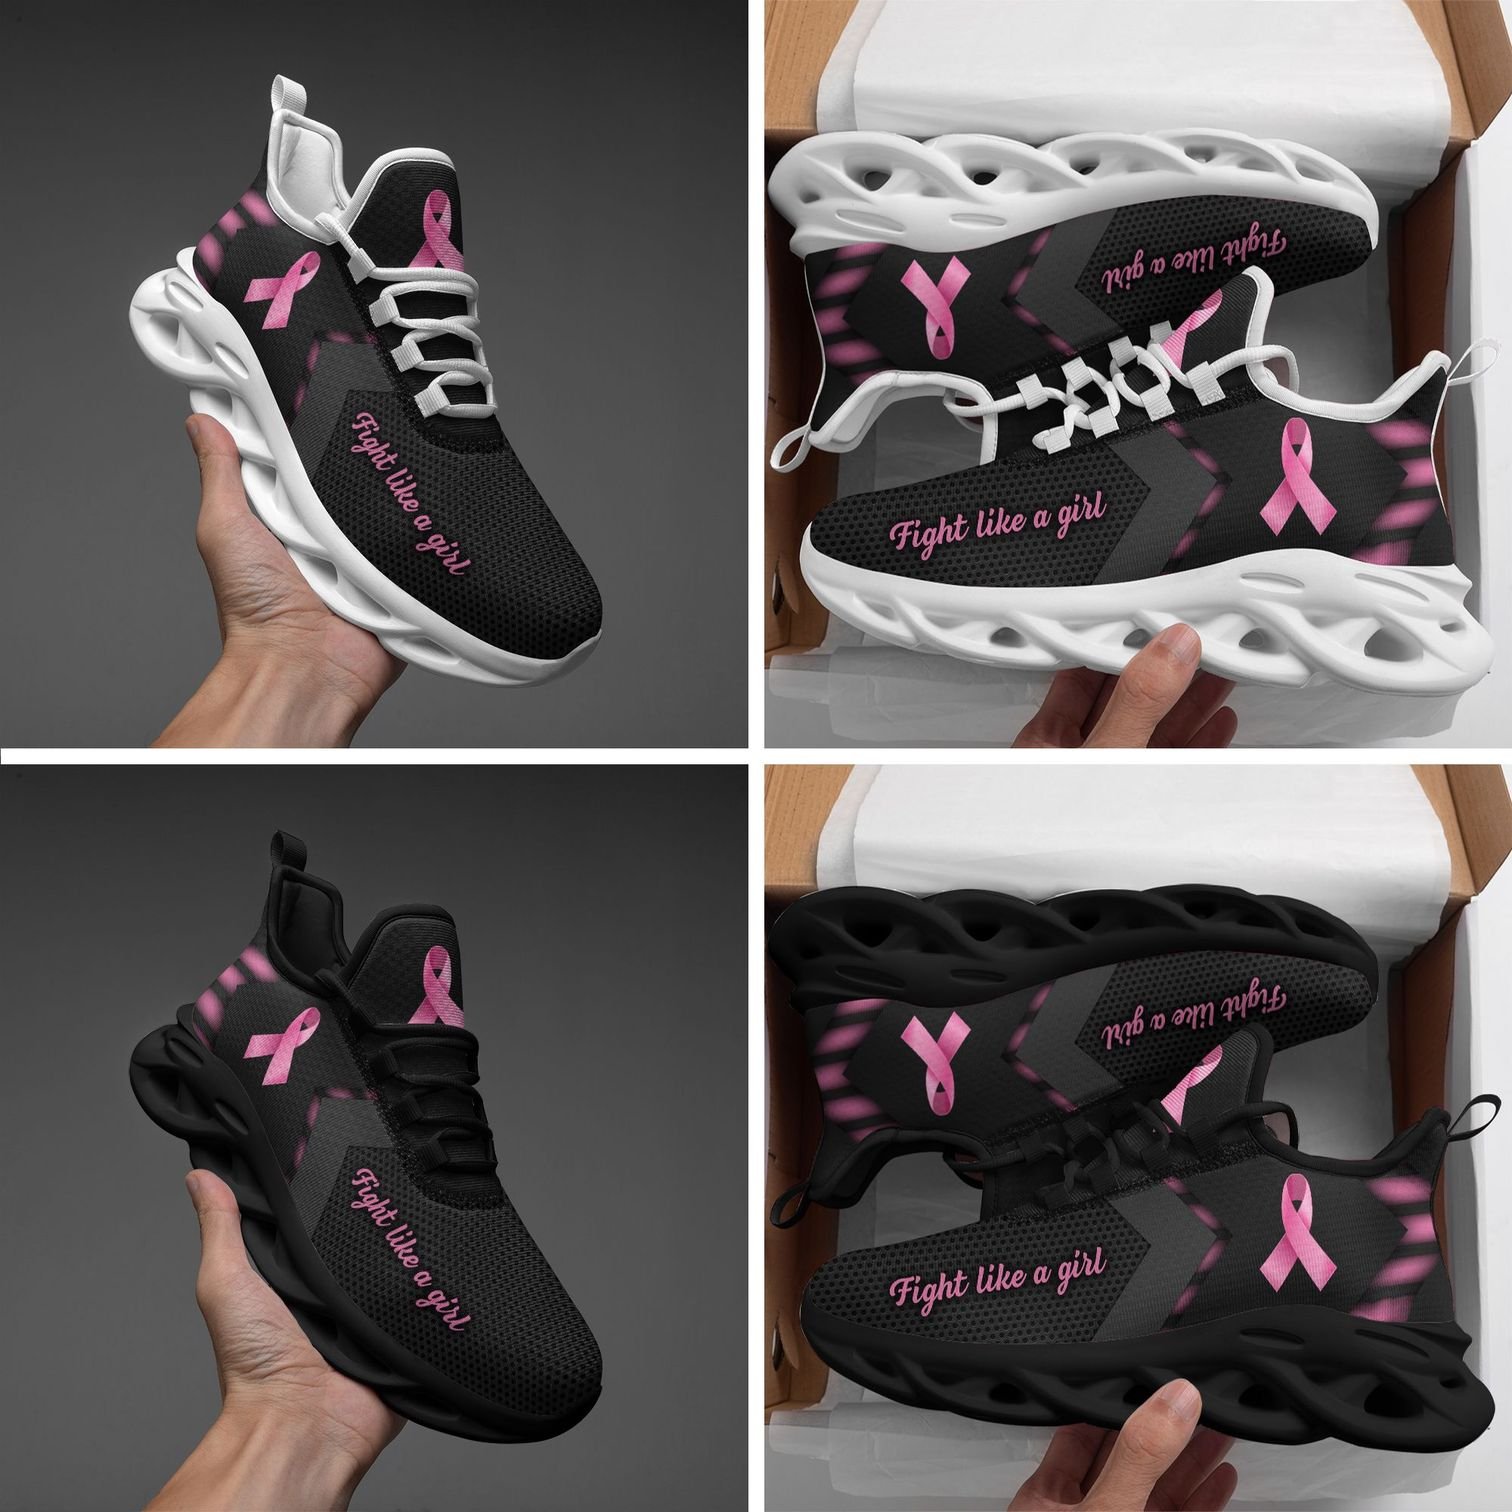 Breast cancer fight like a girl clunky max soul shoes5